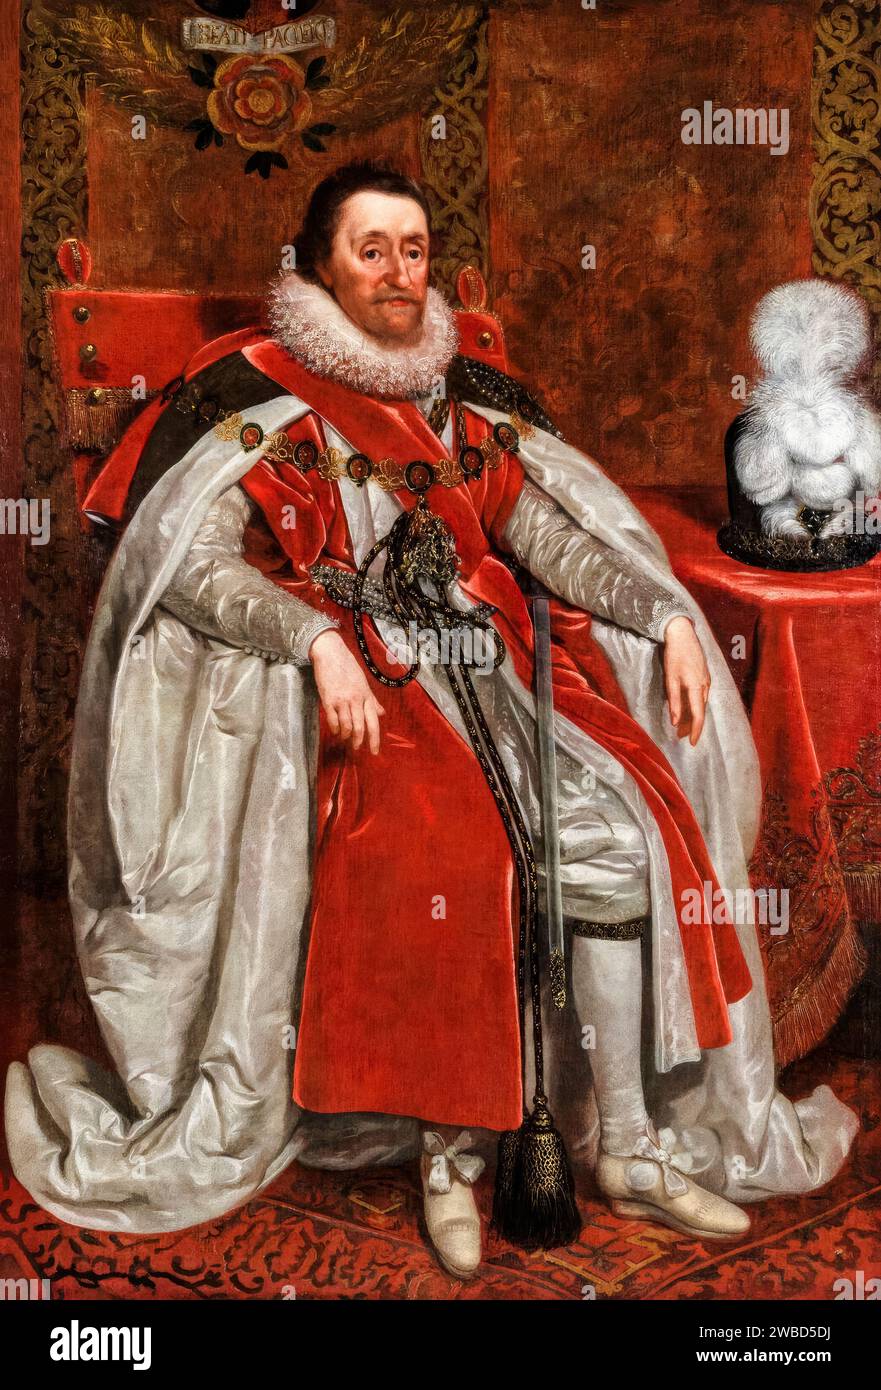 James I of England (James VI of Scotland) (1566-1625), British King, portrait painting in oil on canvas by Daniel Mytens, 1621 Stock Photo